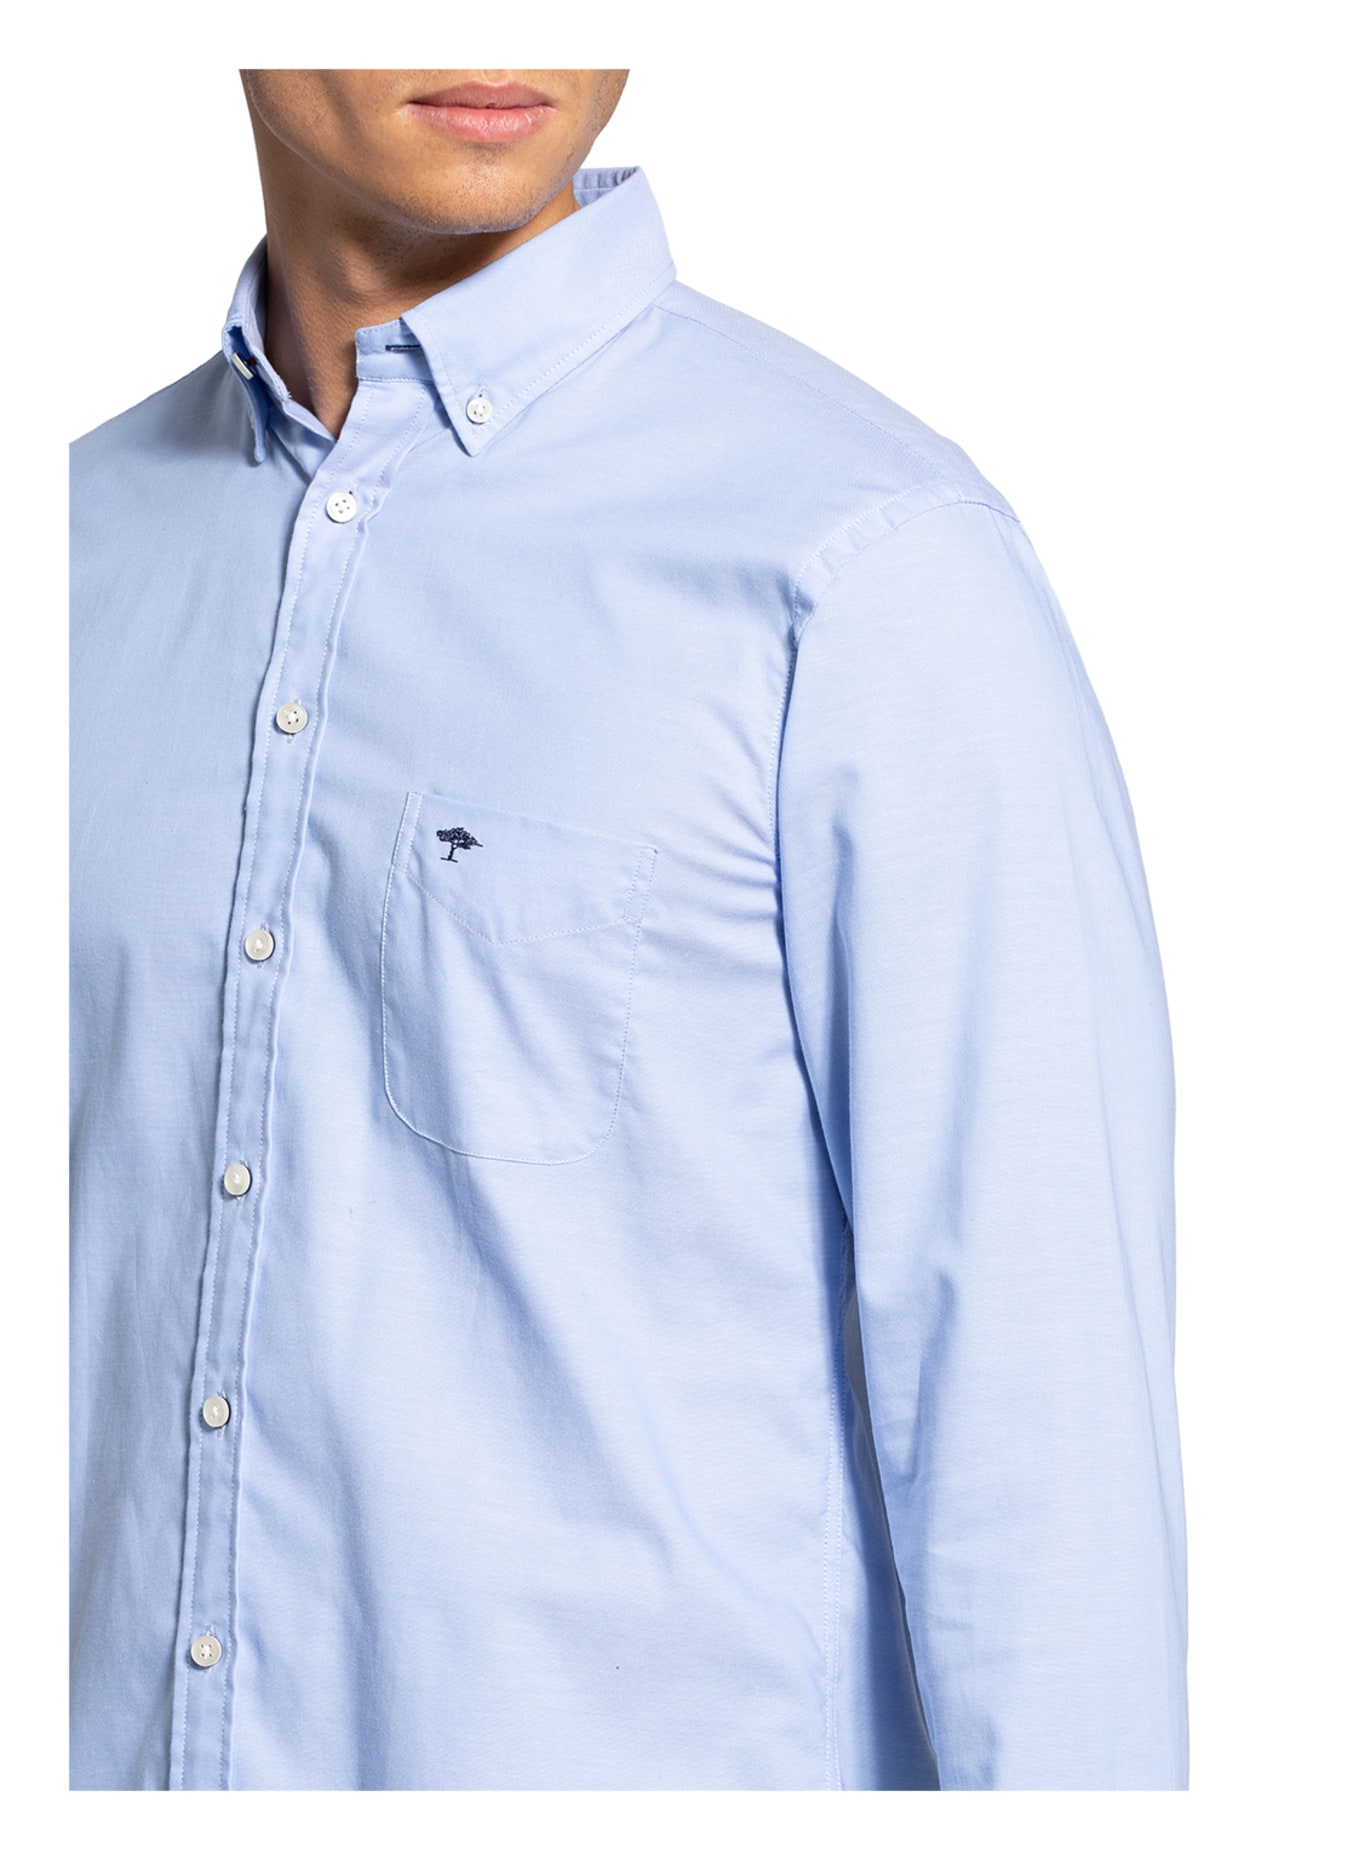 FYNCH-HATTON Shirt casual fit light blue in